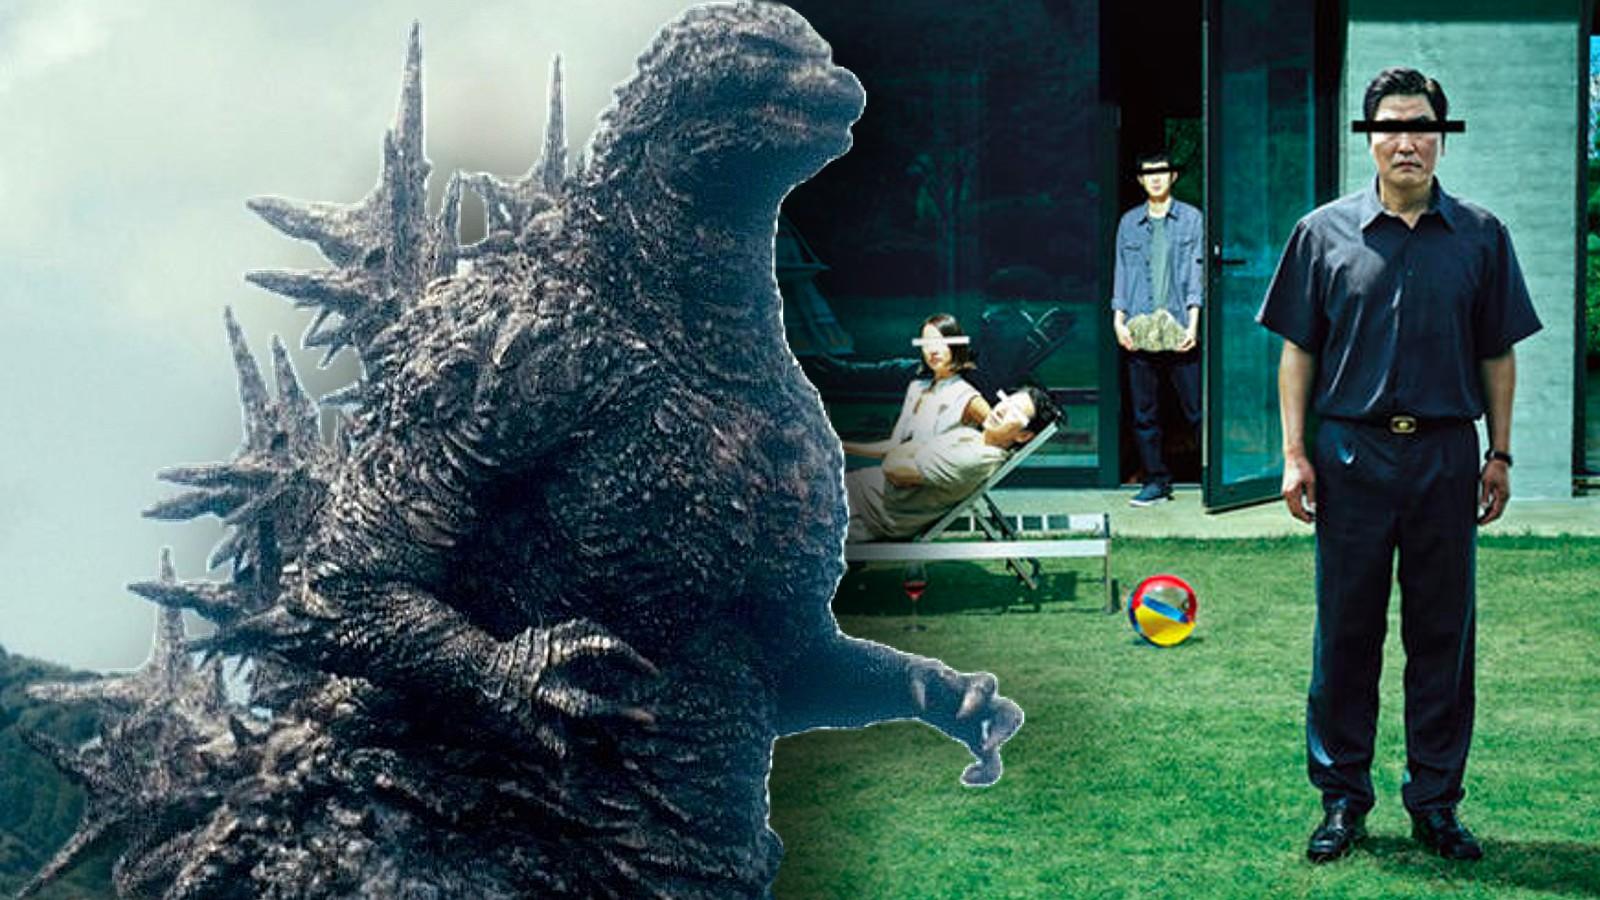 A still from Godzilla Minus One and the poster for Parasite